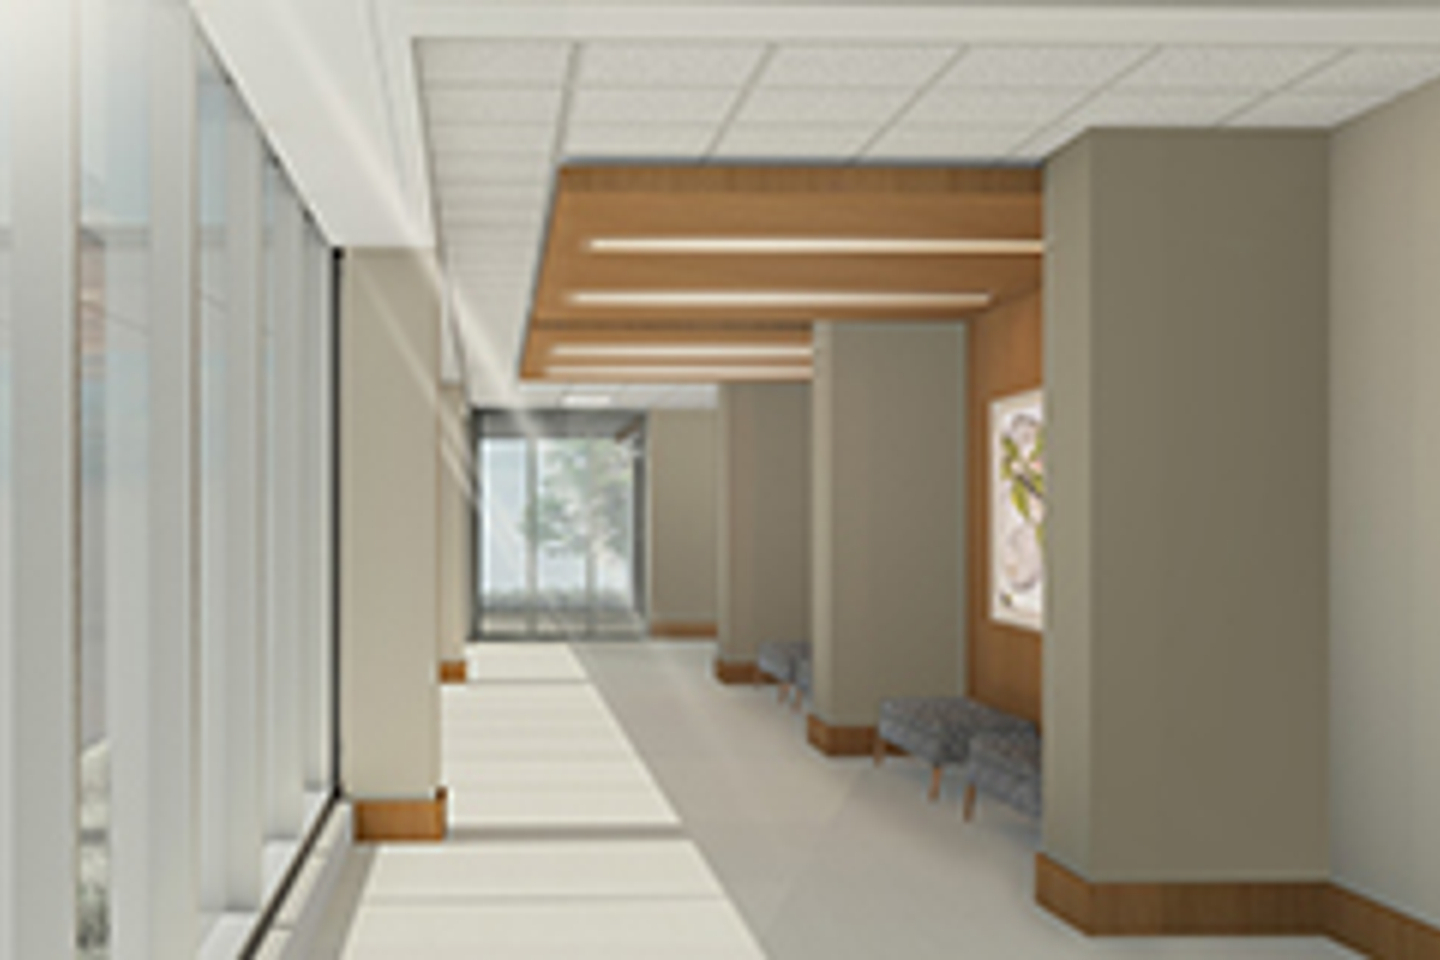 Interior view of a hallway in Reston Hospital Center, windows to the left and bench seating to the right along the wall.